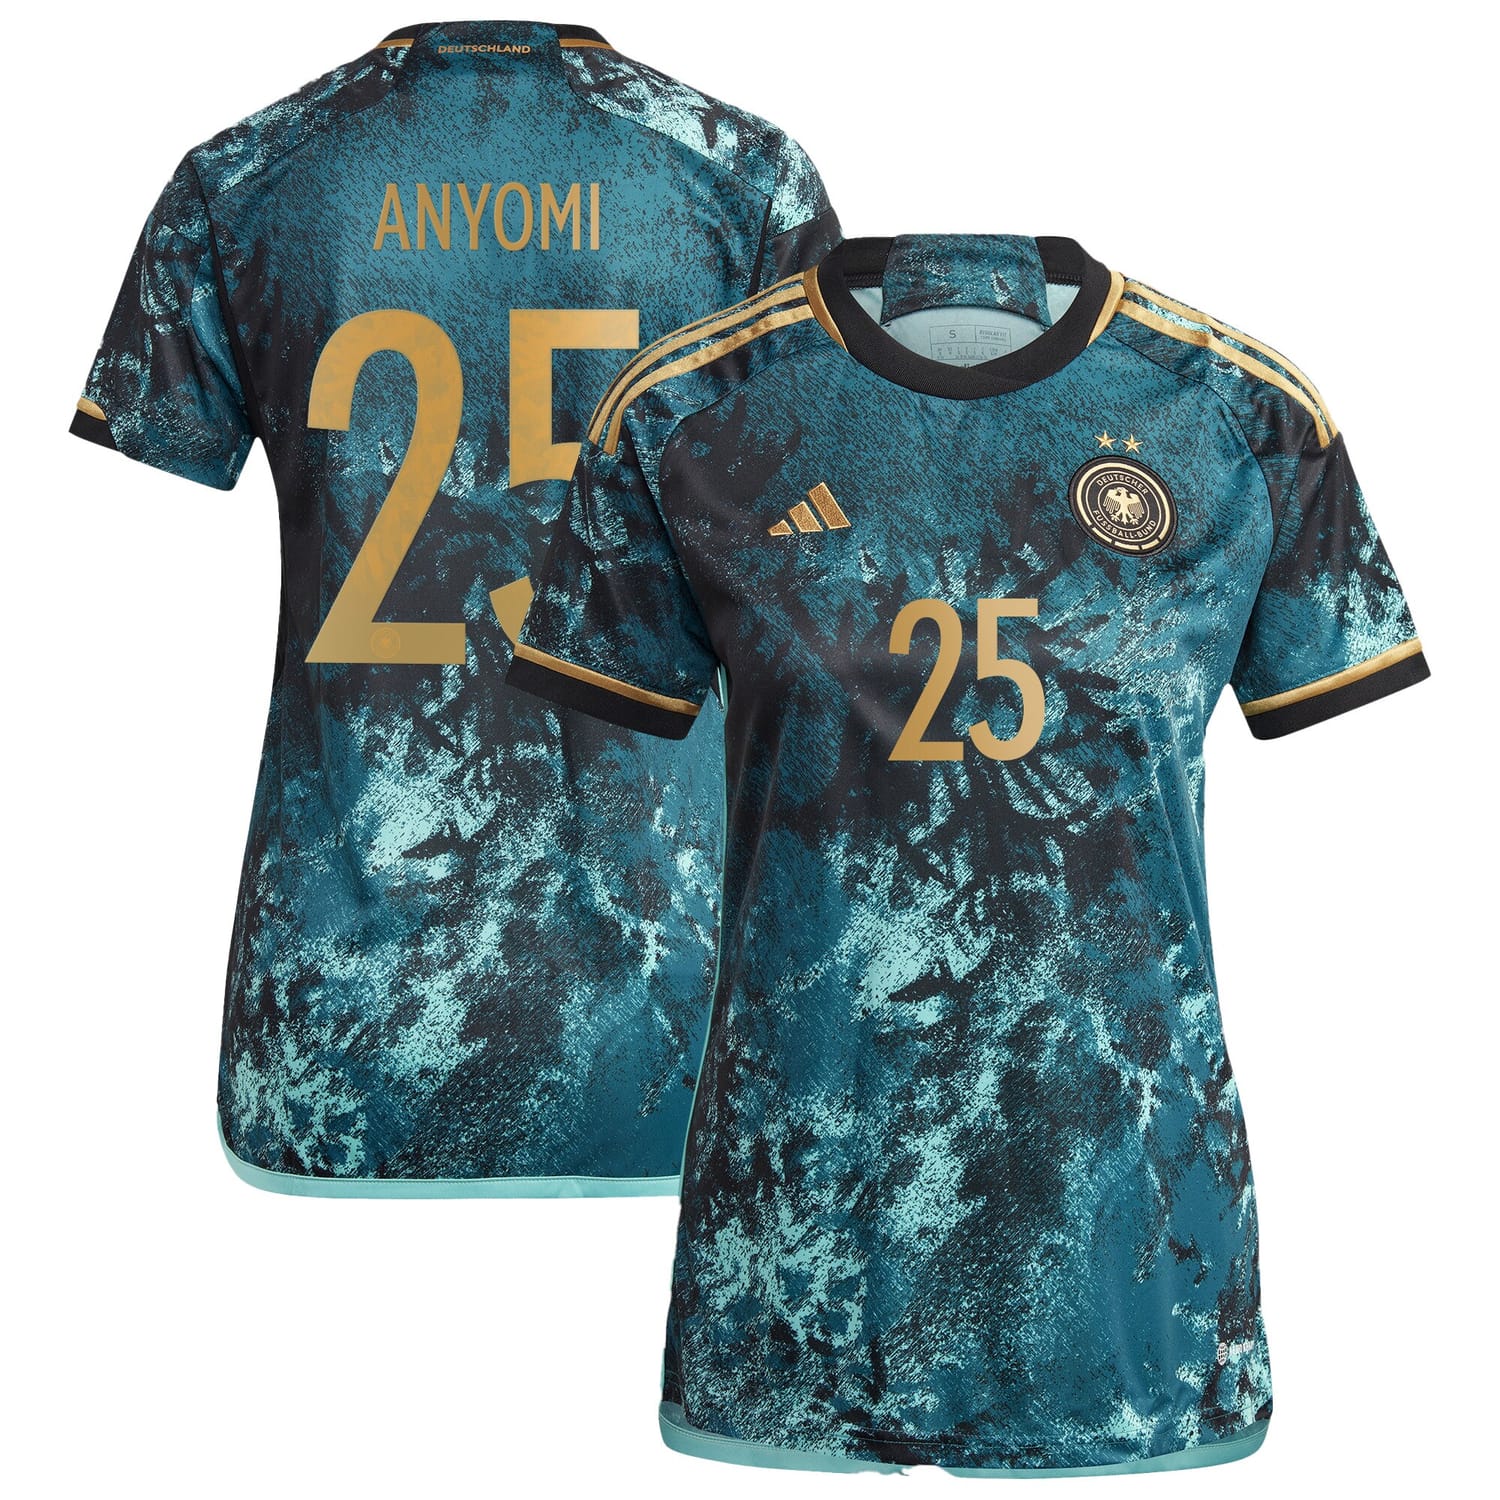 Germany National Team Away Jersey Shirt 2023 player Nicole Anyomi 25 printing for Women